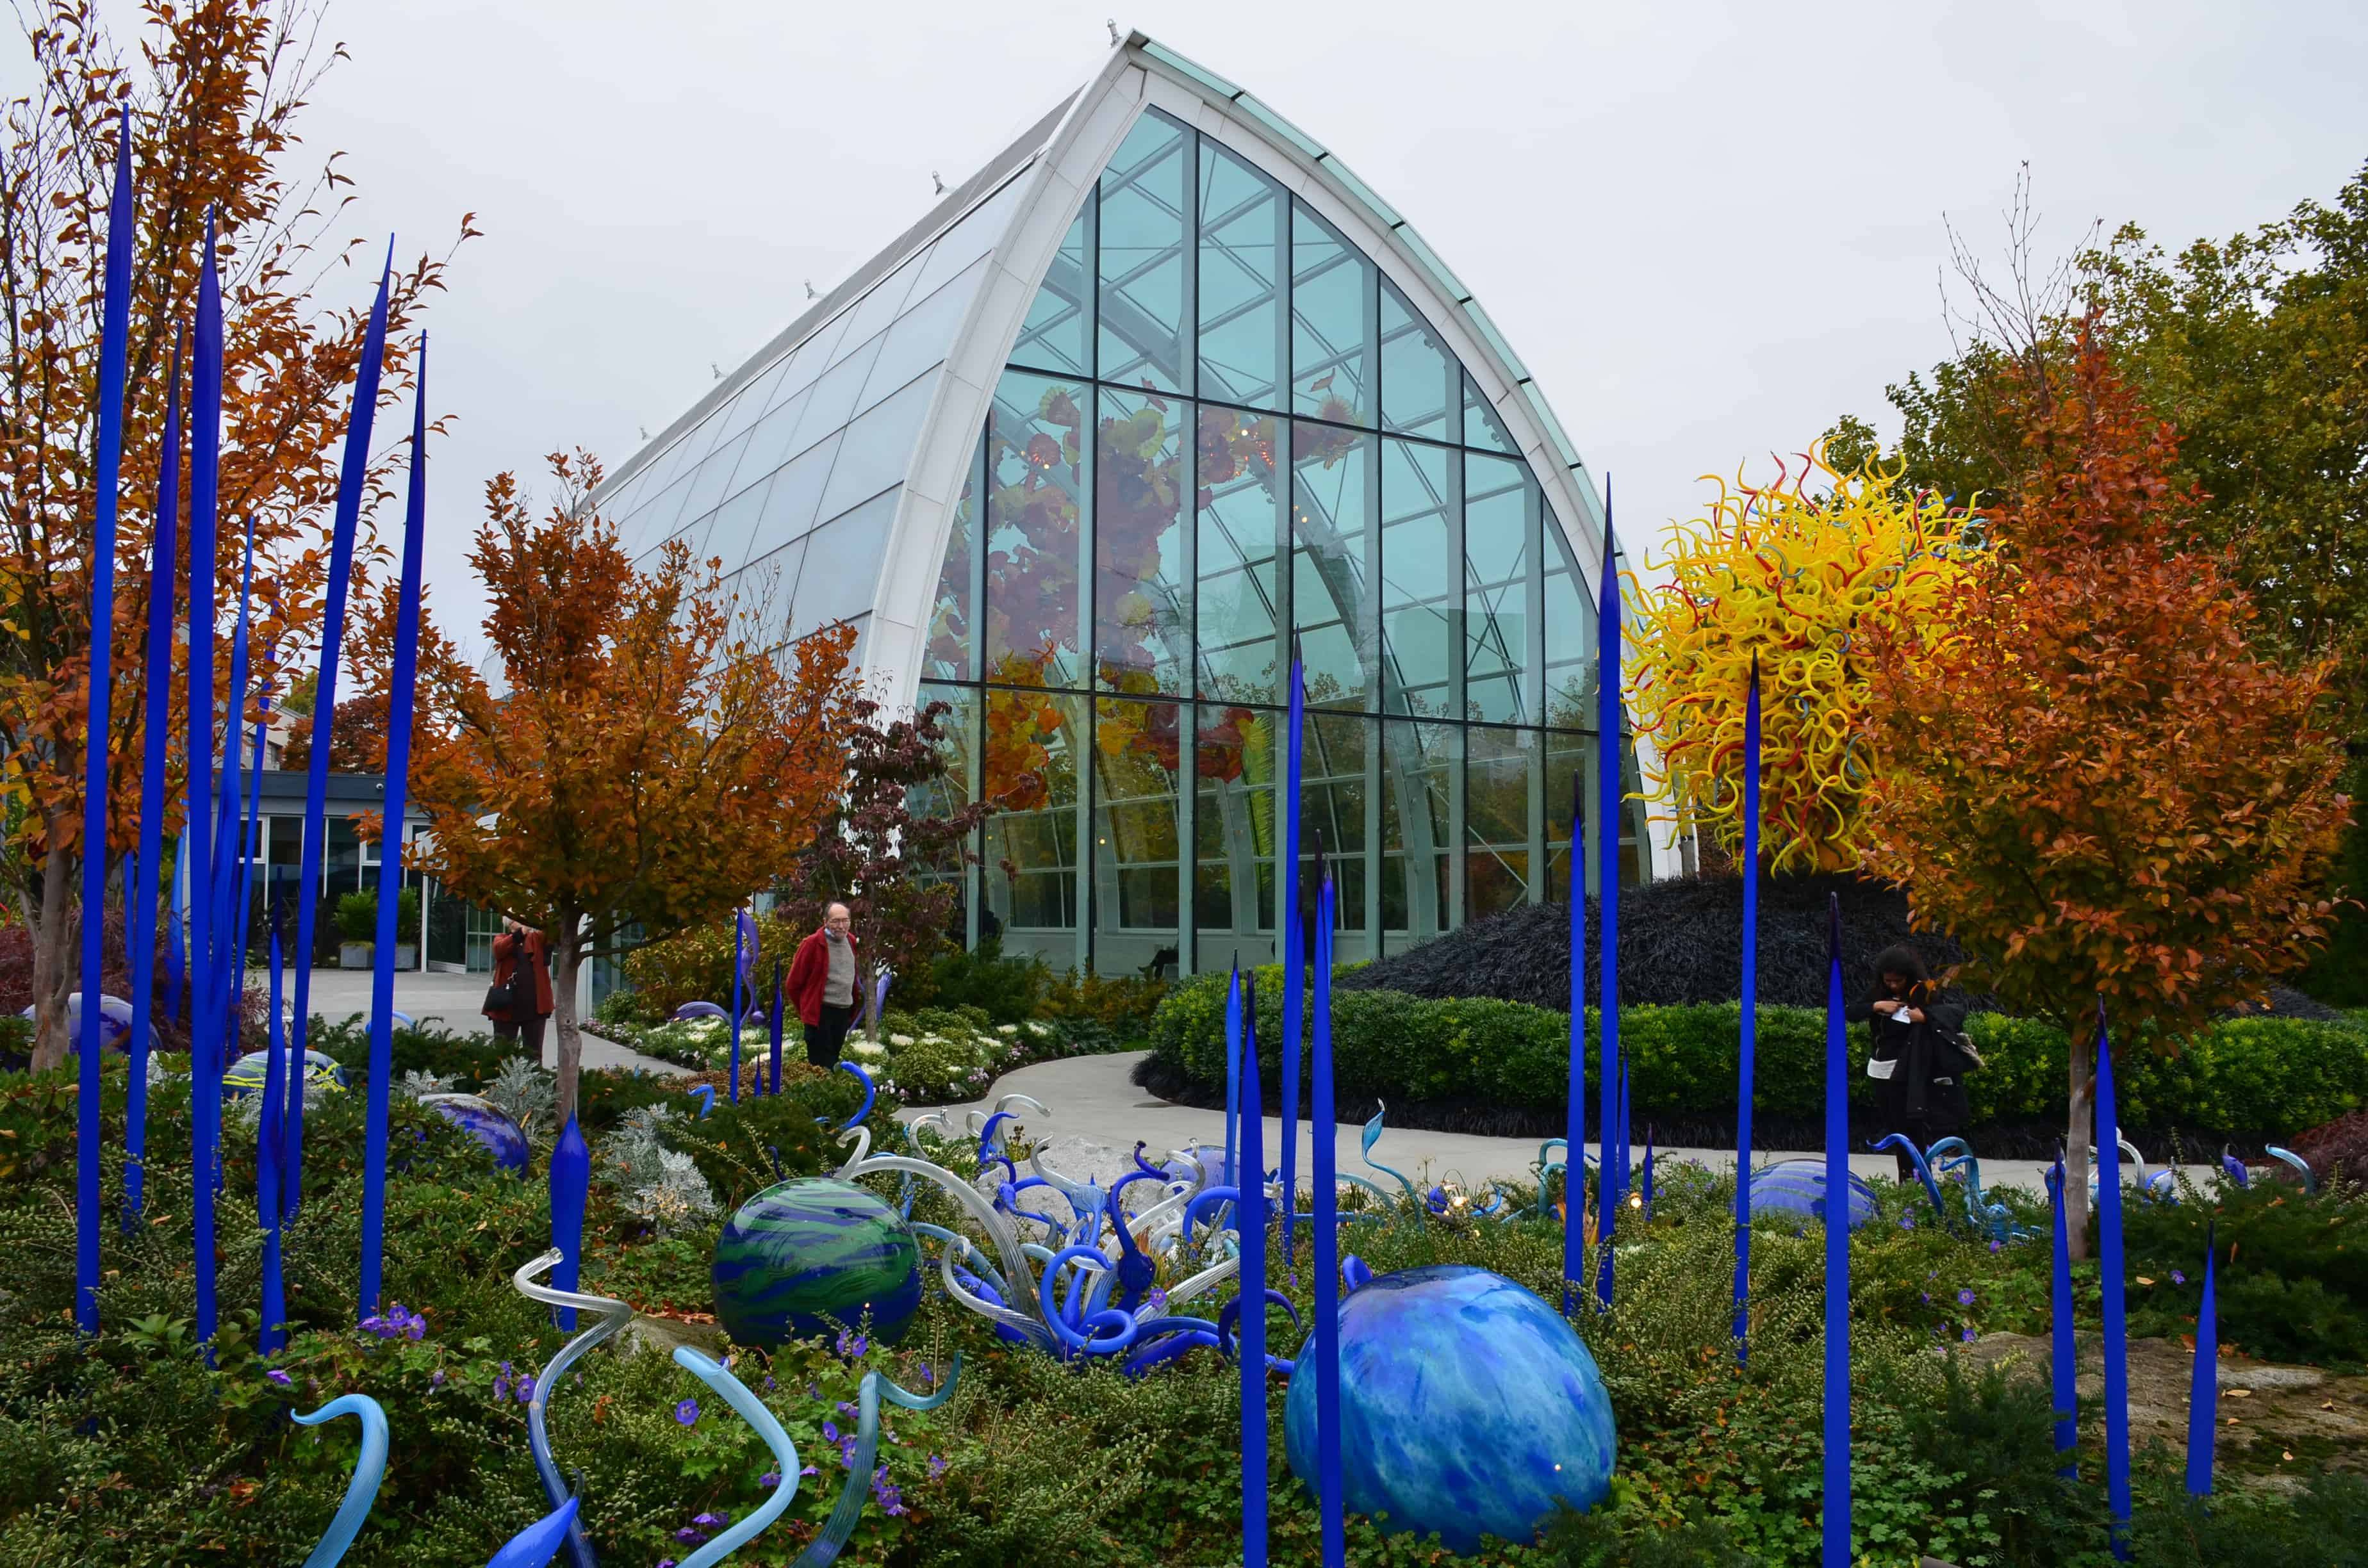 Glasshouse at Chihuly Garden and Glass in Seattle, Washington